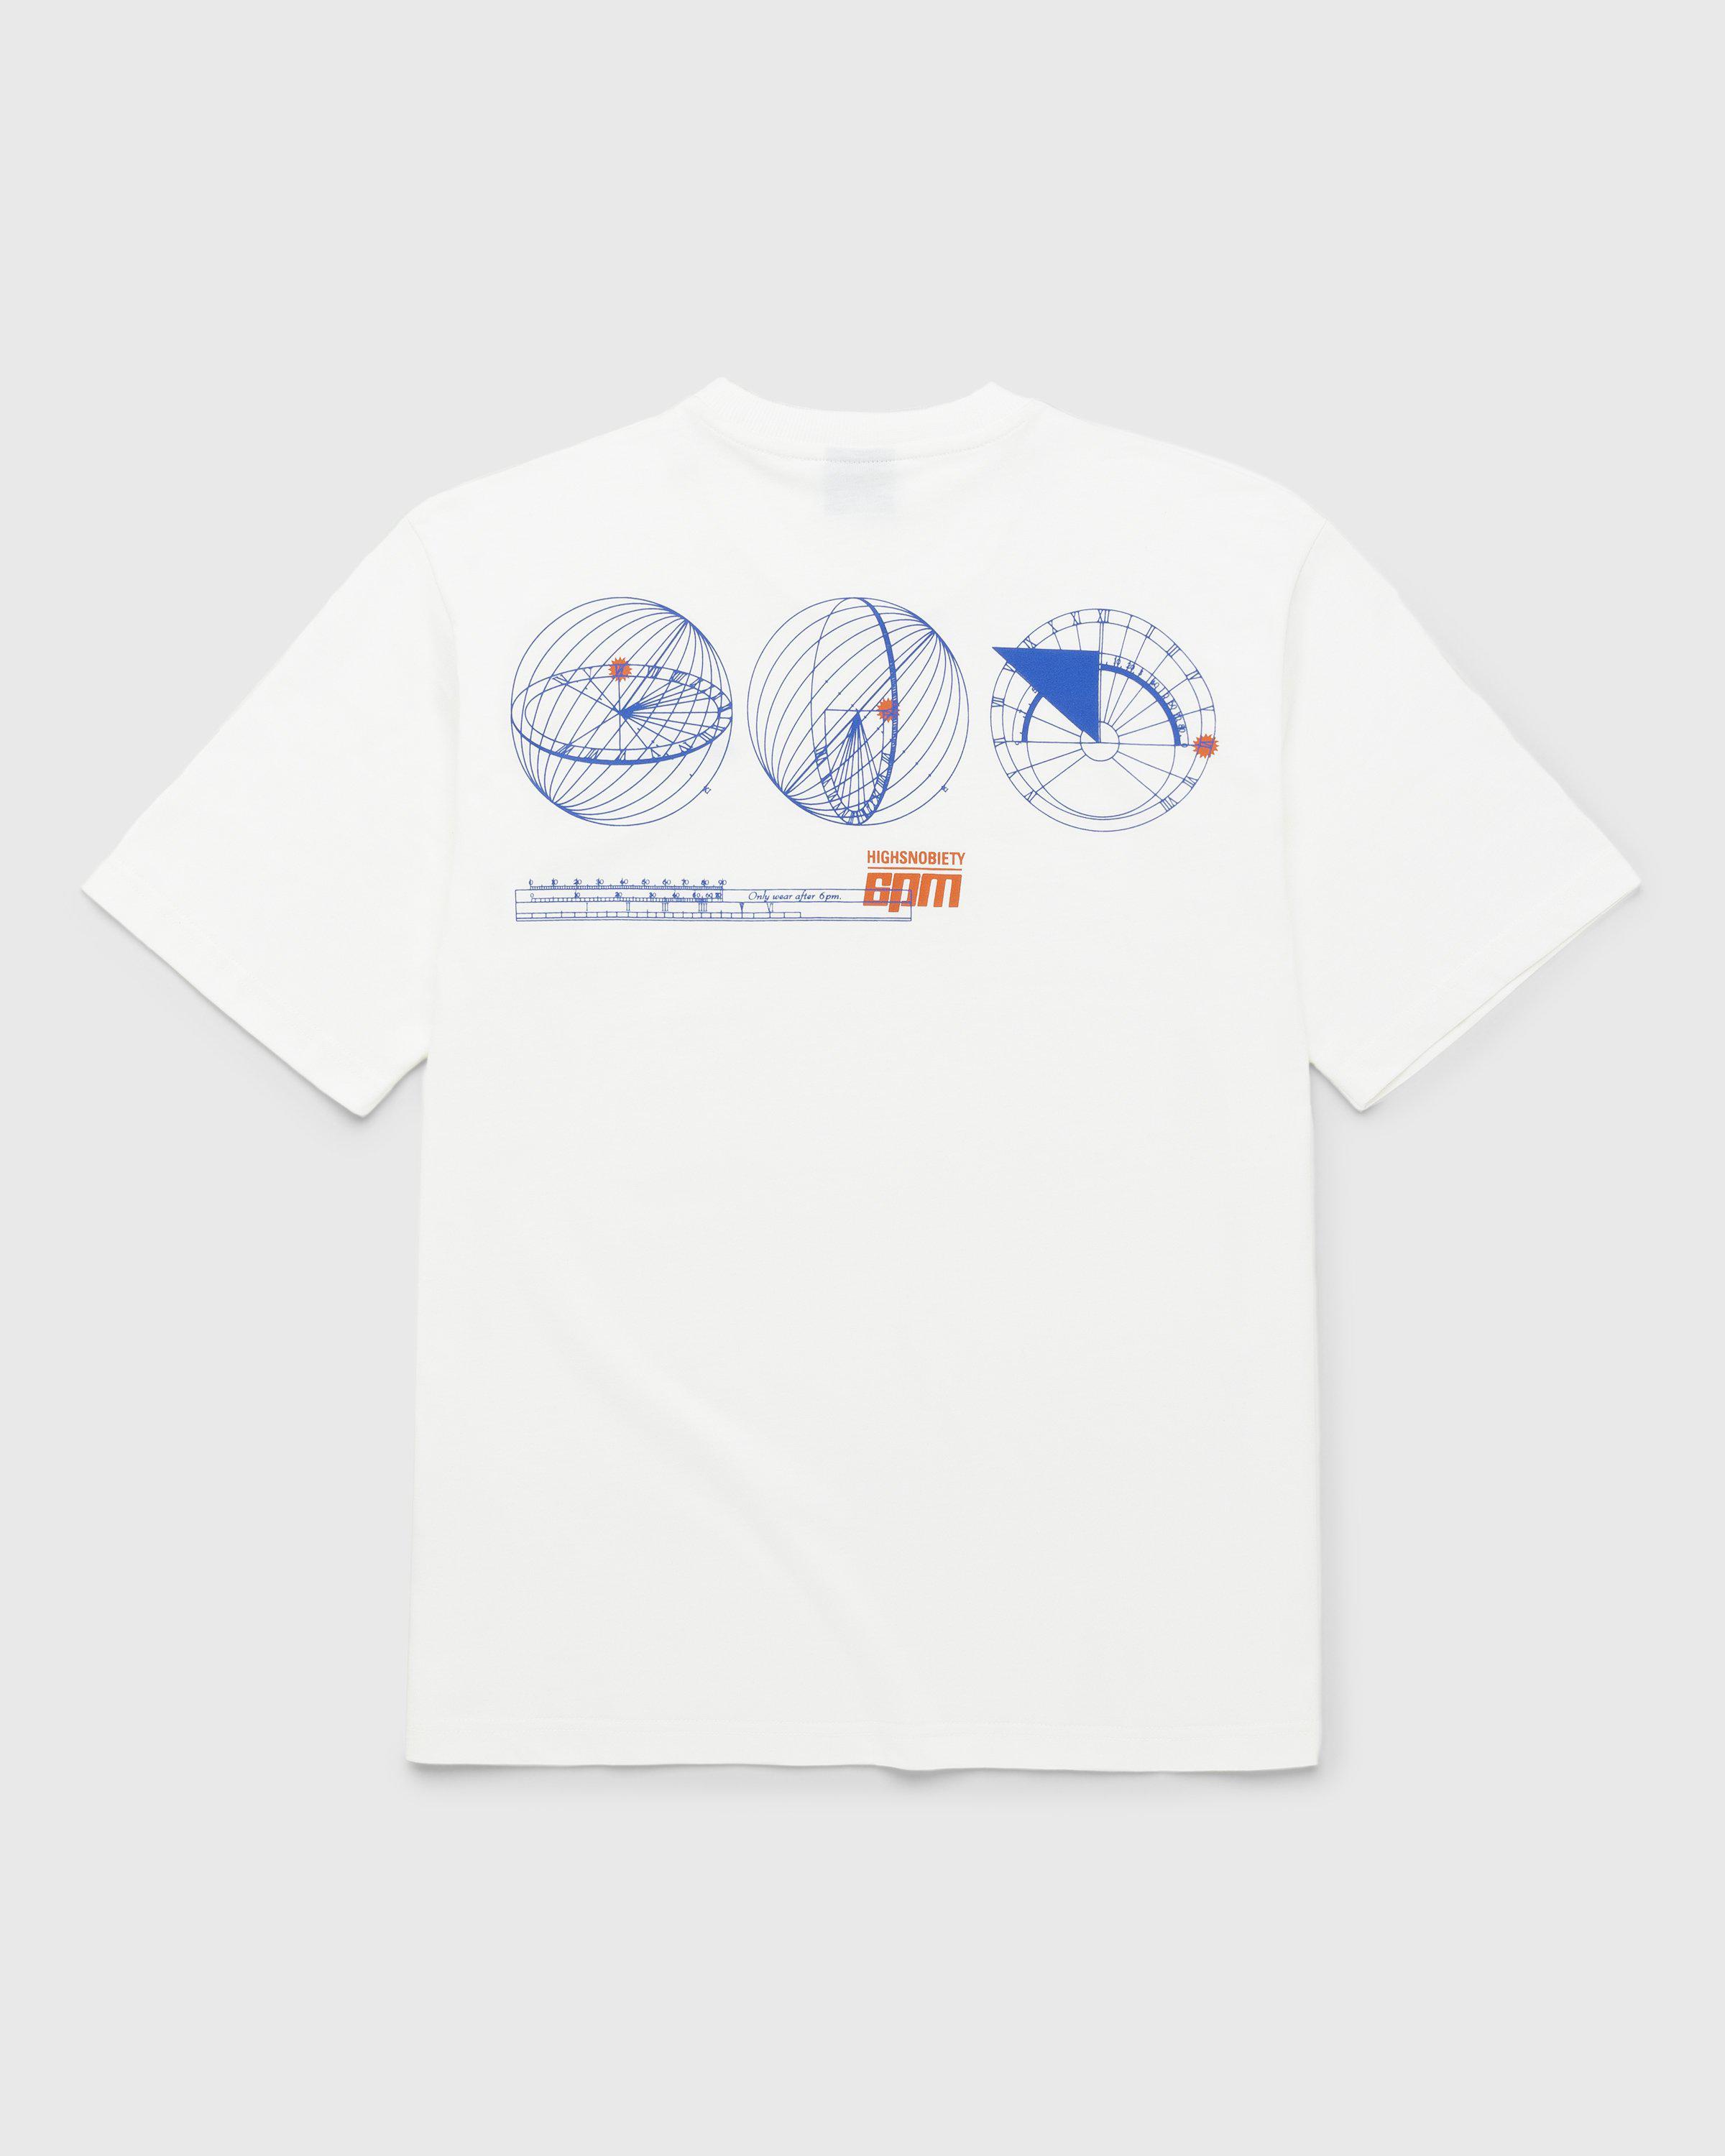 6PM x Highsnobiety – BERLIN, BERLIN 3 Only Wear After 6PM T-Shirt White by 6PM X HIGHSNOBIETY